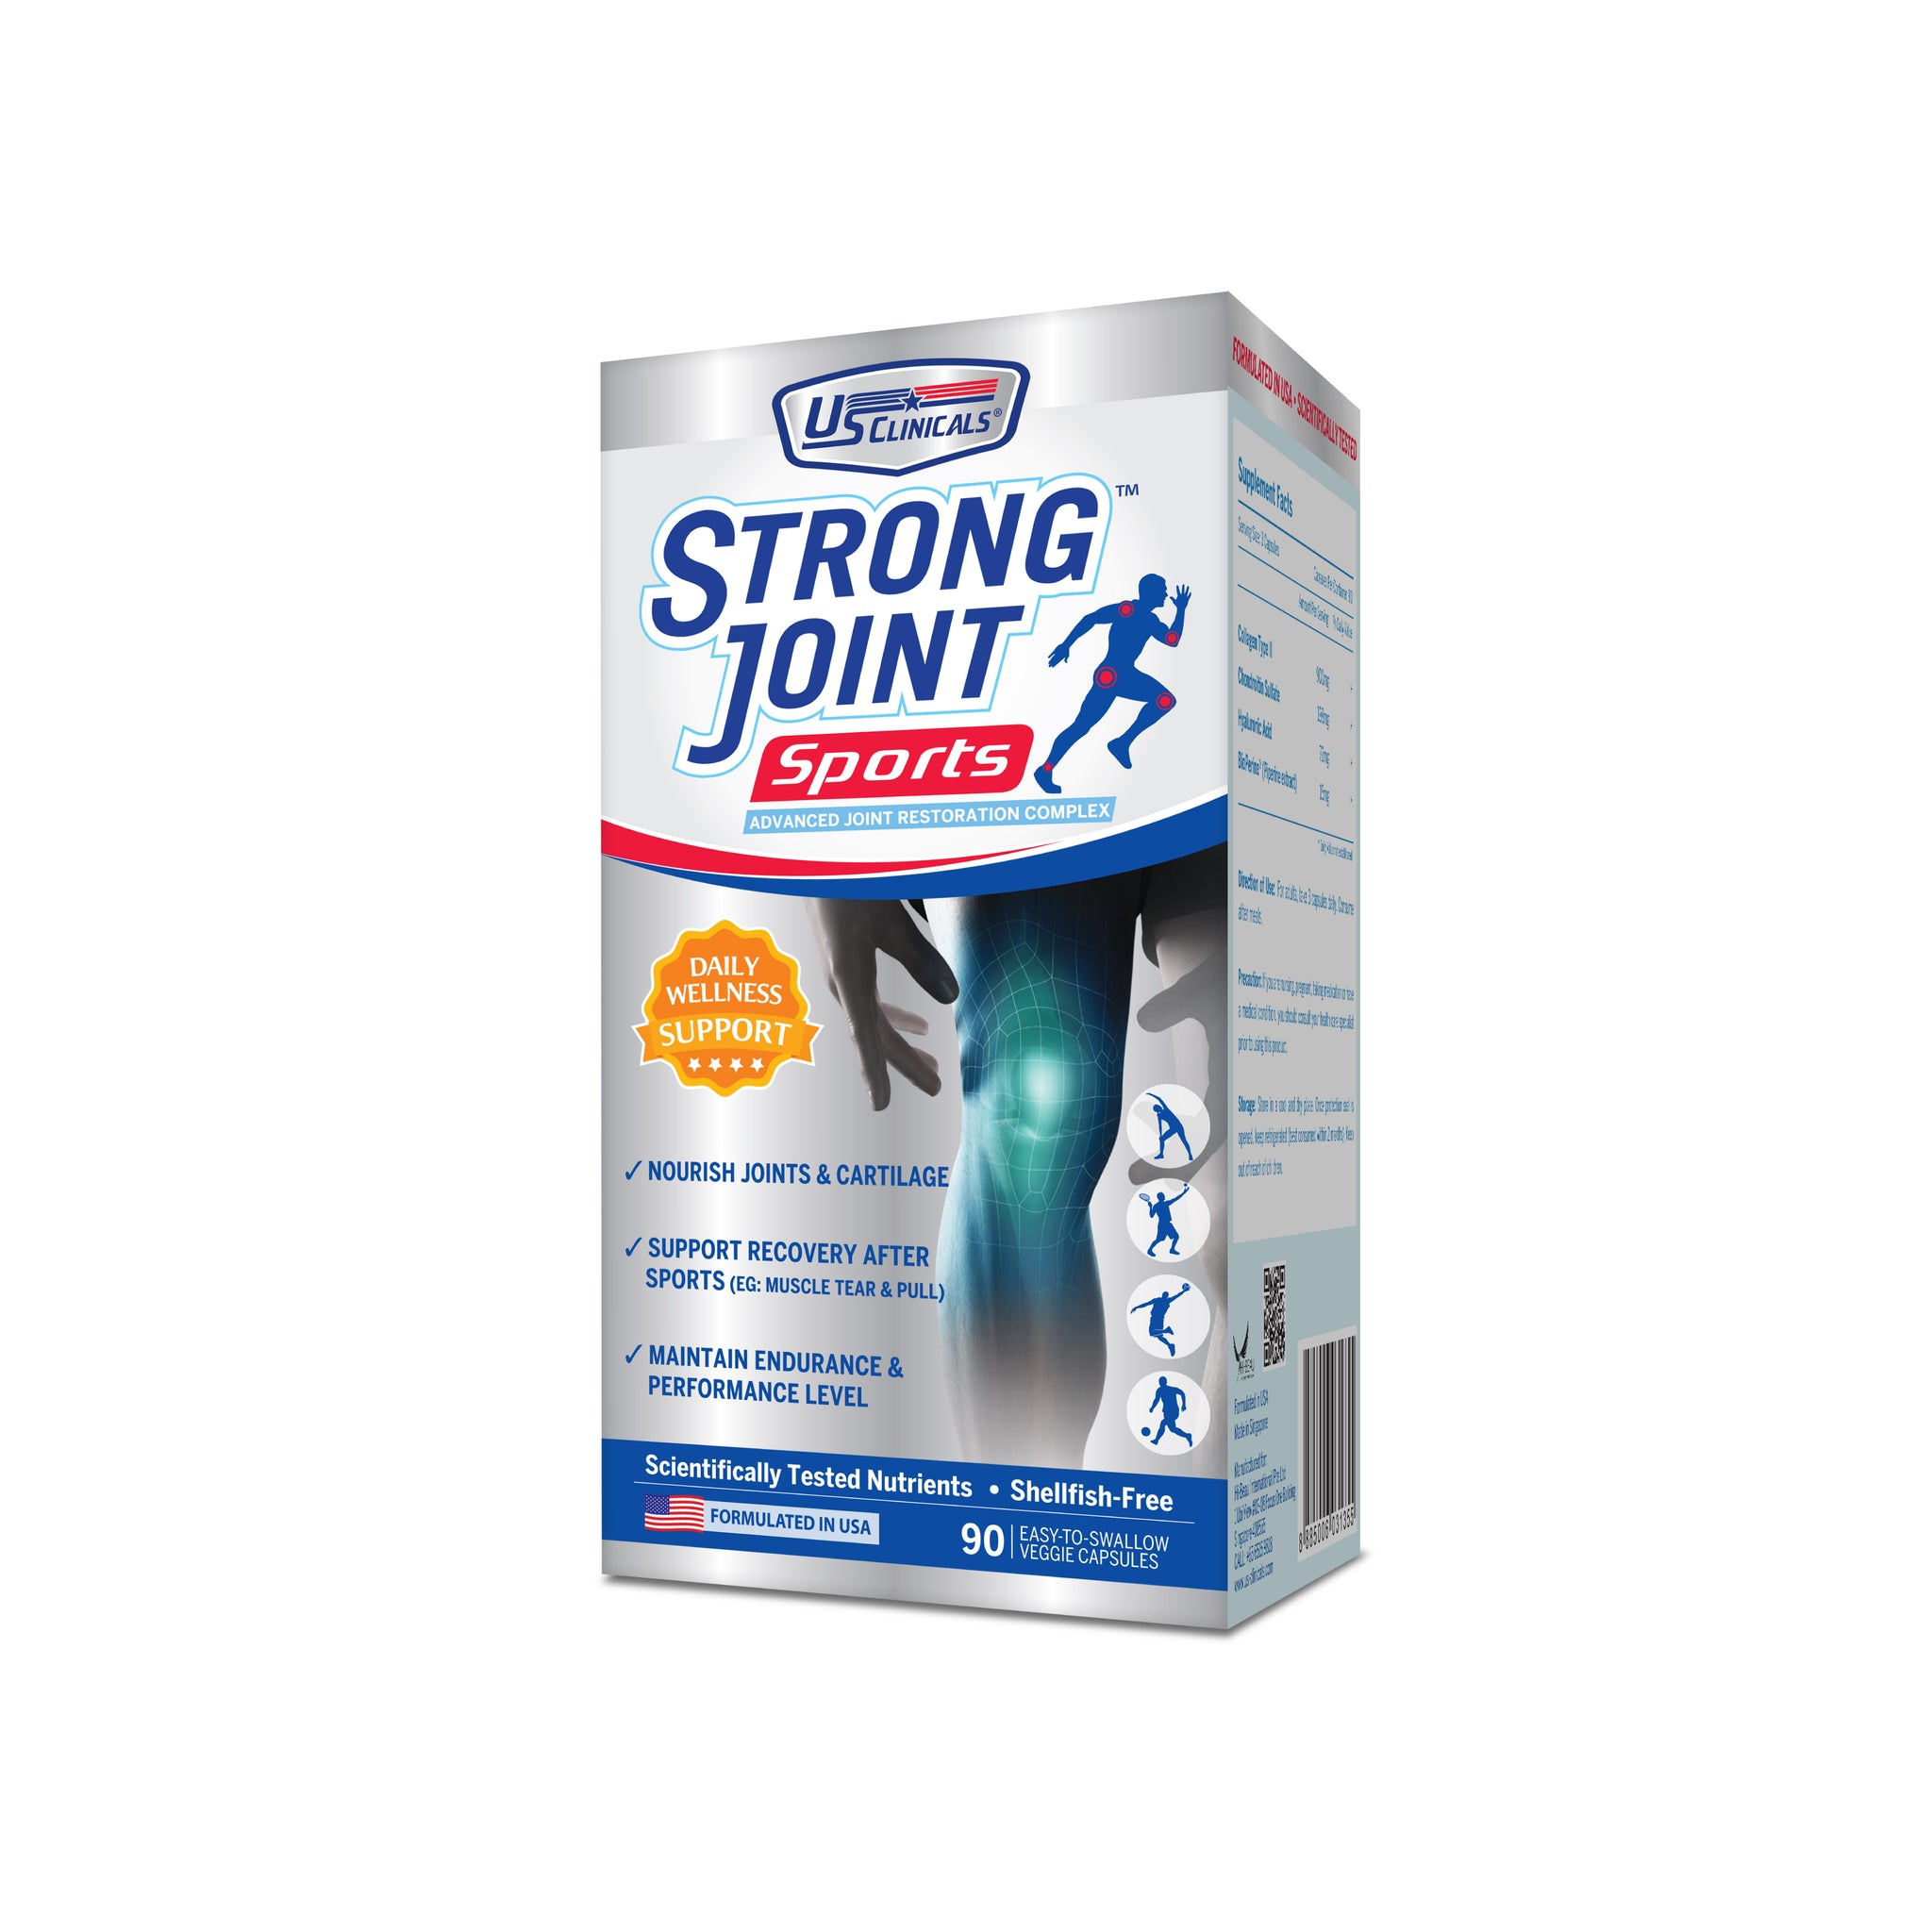 US Clinicals® StrongJoint™ Sports.